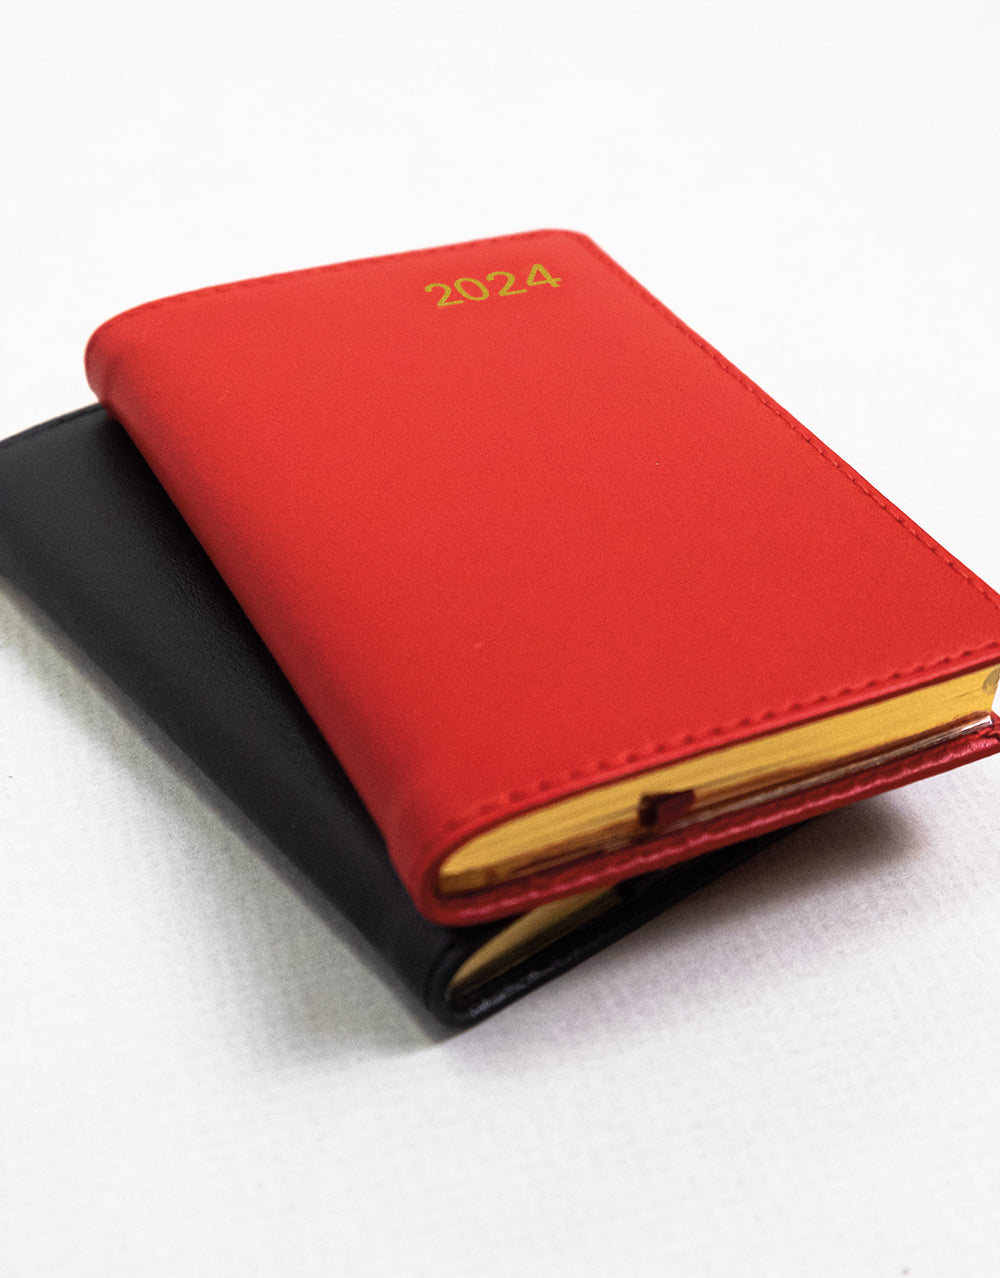 Belgravia Mini Pocket Week to View Leather Diary with Planners 2024 - English#color_red